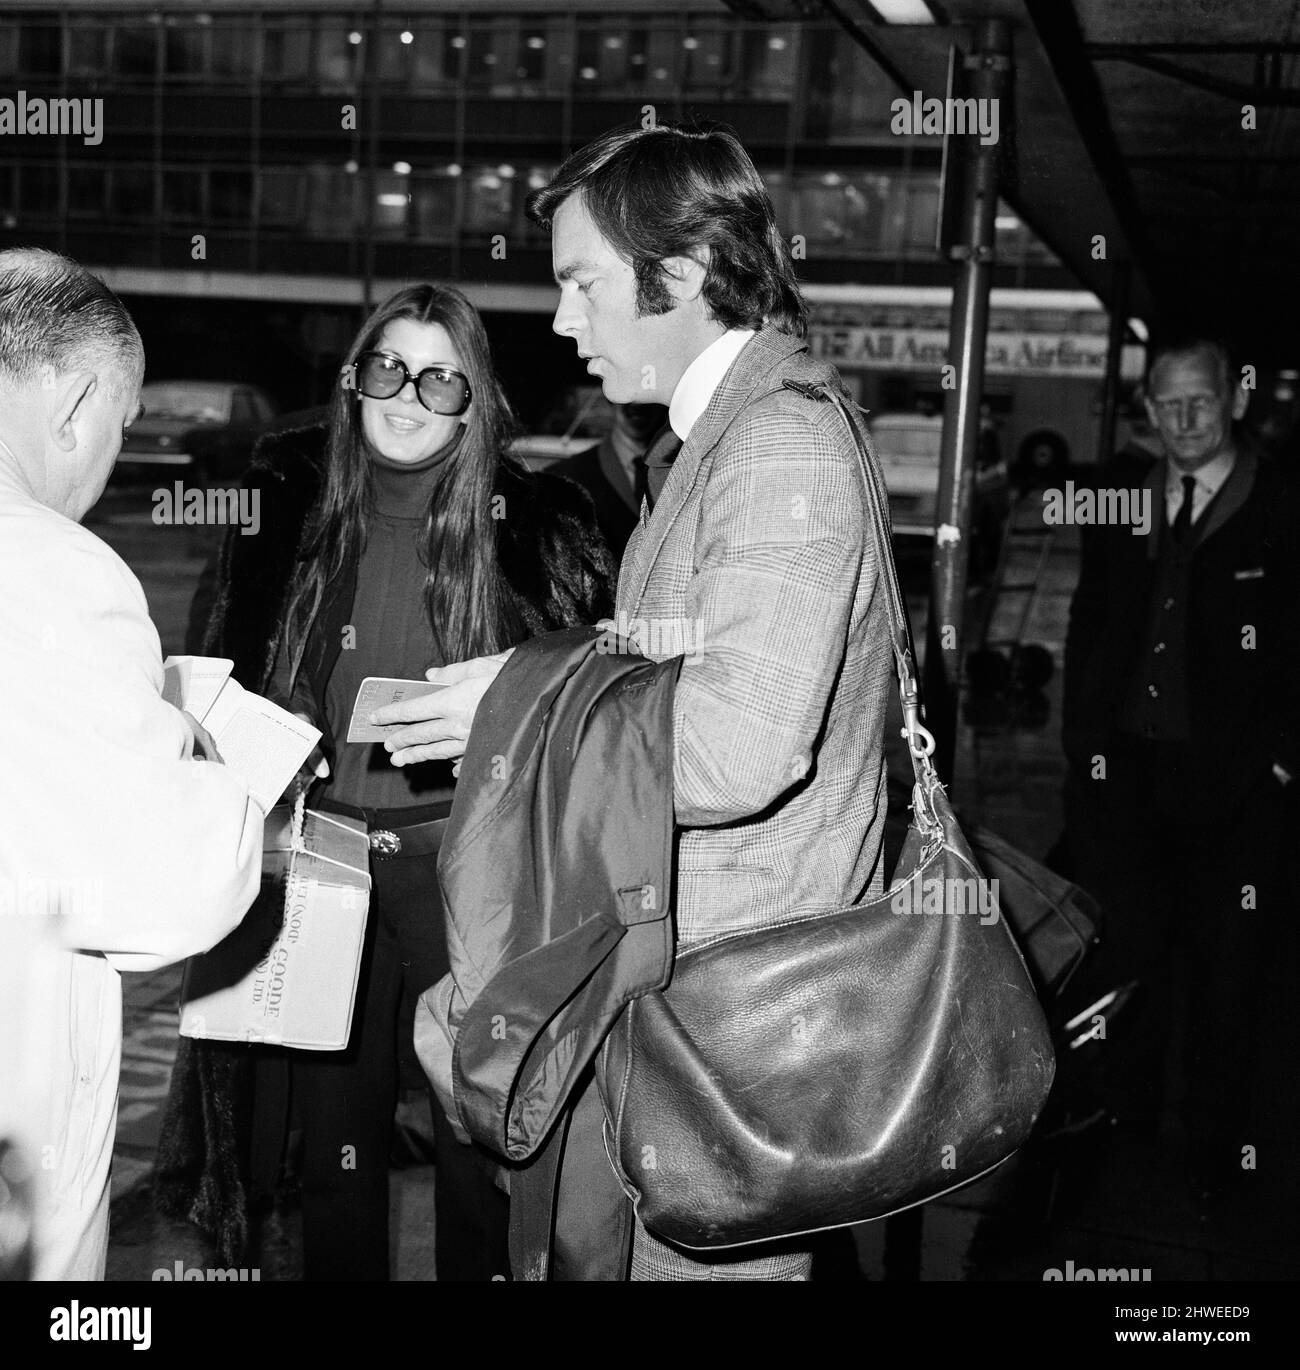 Robert Wagner and Tina Sinatra left Heathrow Airport hand in hand for Los Angeles today. They have been here and in Milan for several days on a private visit. Whilst here they watched Frank Sinatra and Bob Hope at the Charity Show at the Festival Hall. 23rd November 1970. Stock Photo